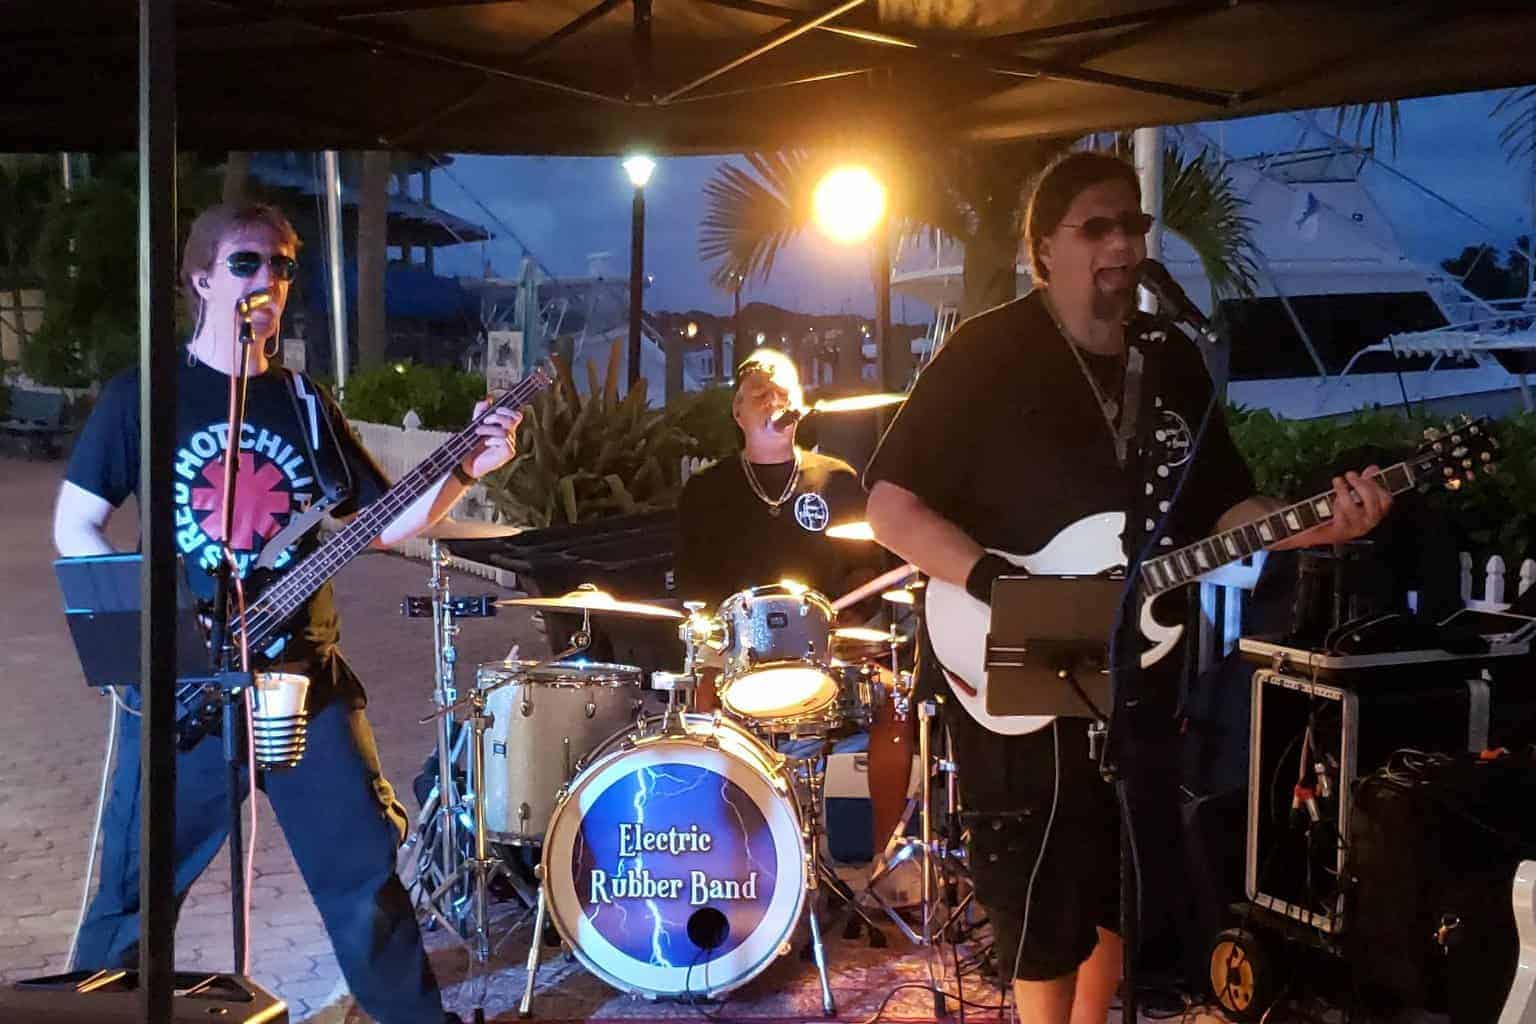 The Electric Rubber Band at the Blue Pointe Bar and Grill